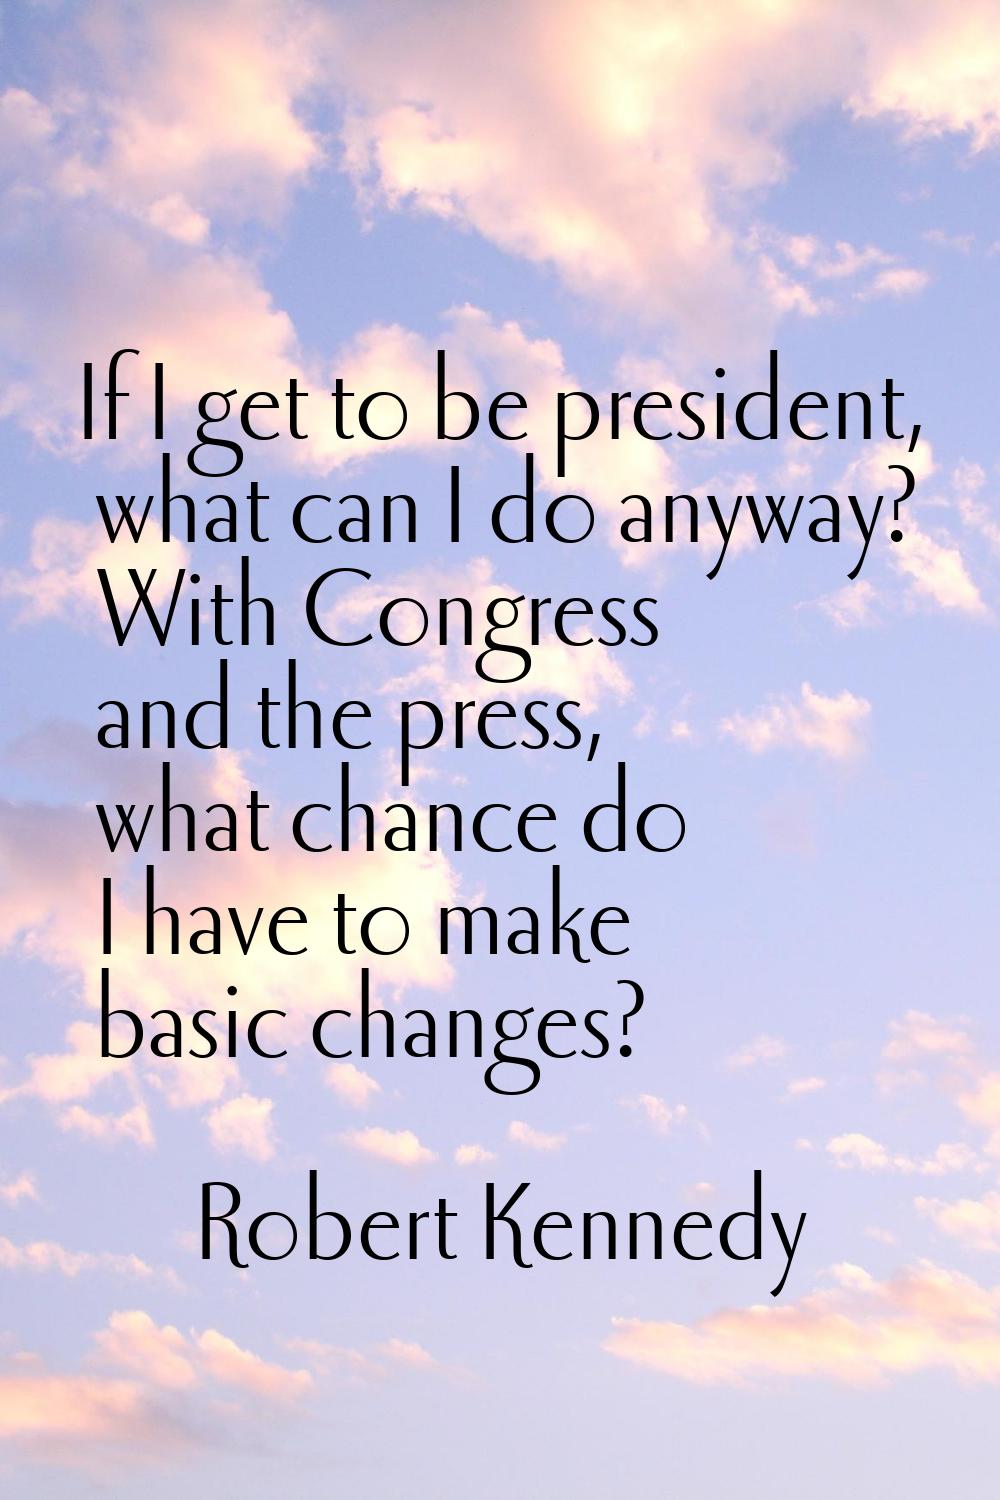 If I get to be president, what can I do anyway? With Congress and the press, what chance do I have 